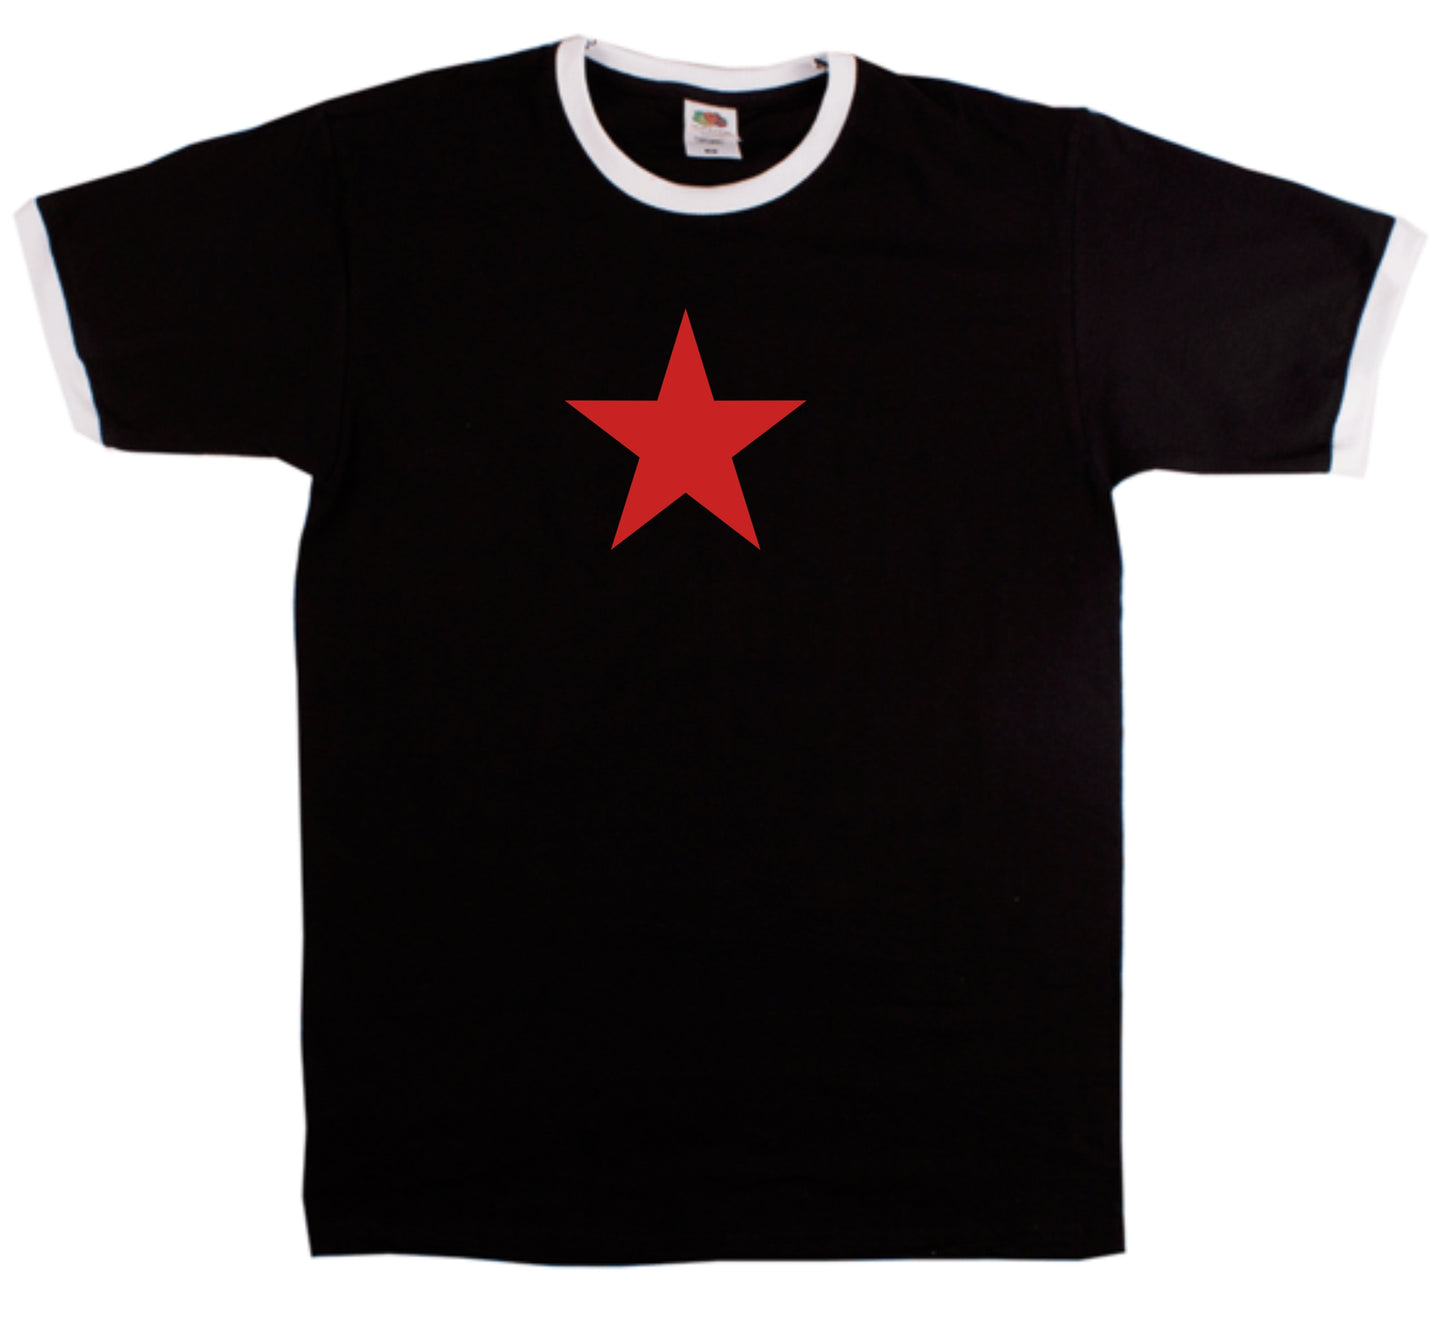 Red Star Ringer T-Shirt - Retro Sub Culture, Protest, Various Colours